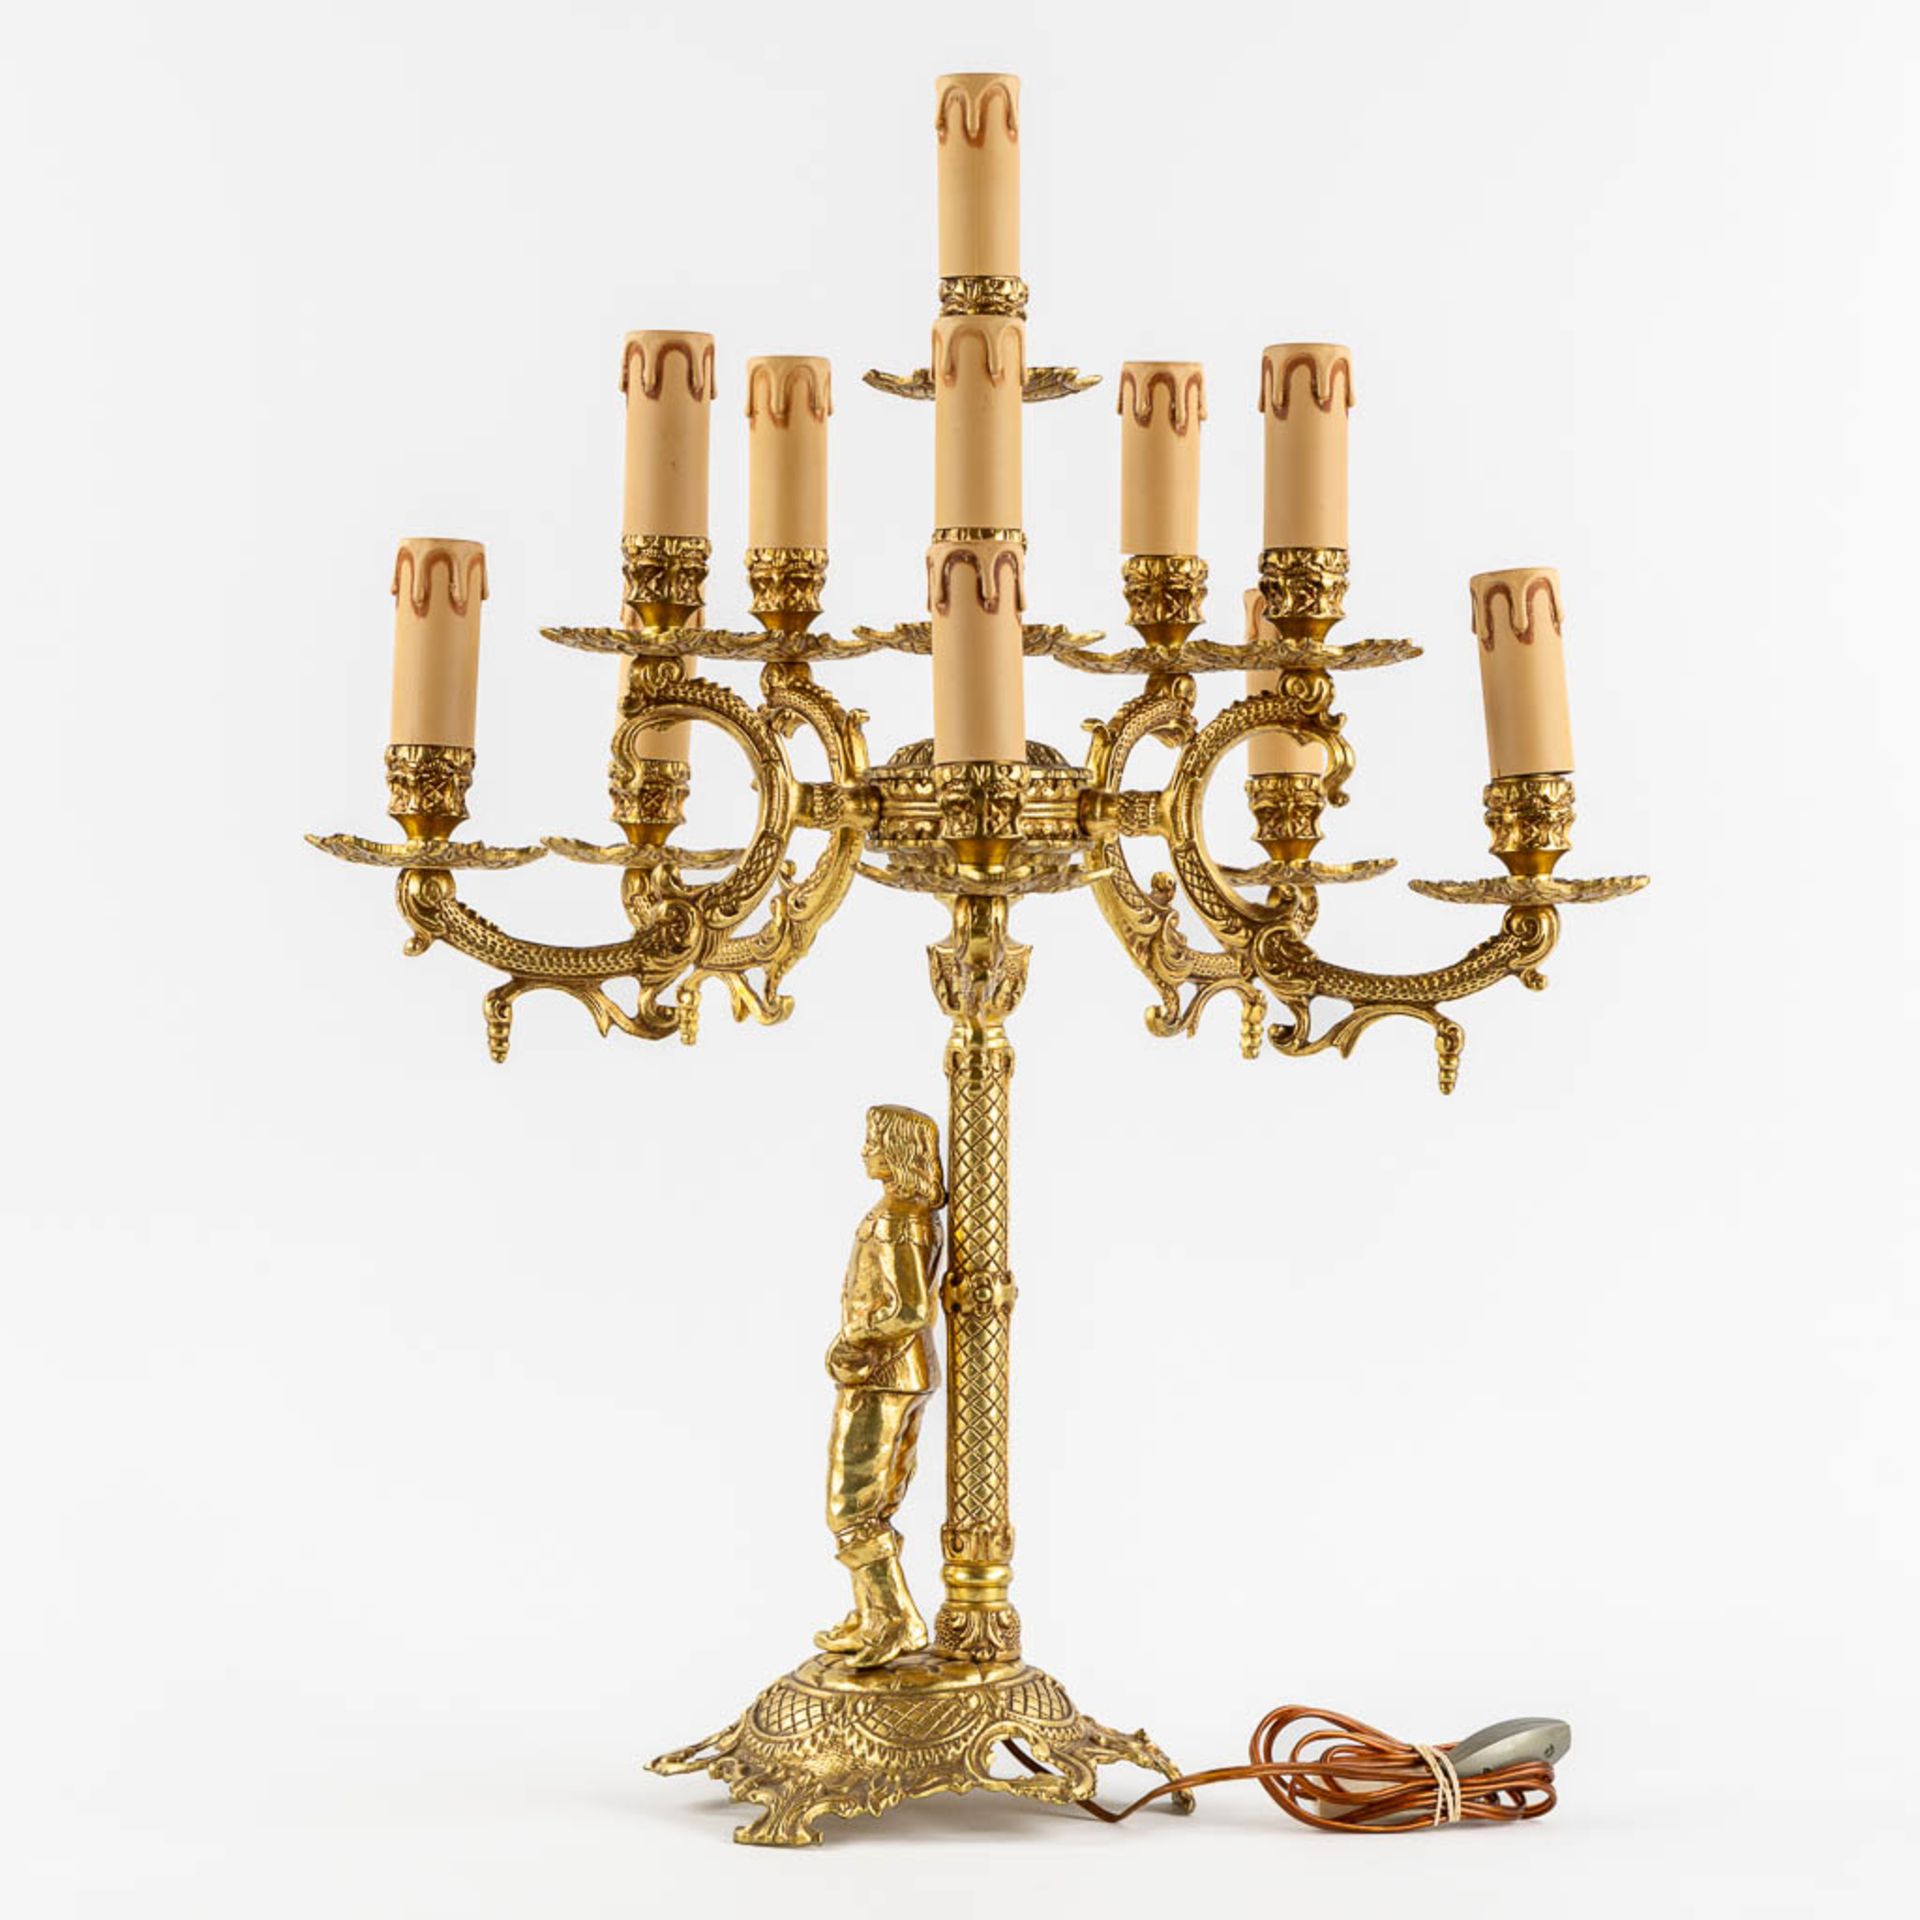 A large and decorative table lamp with a musketeer figurine, gilt bronze. 20th C. (H:61 x D:46 cm) - Bild 5 aus 11